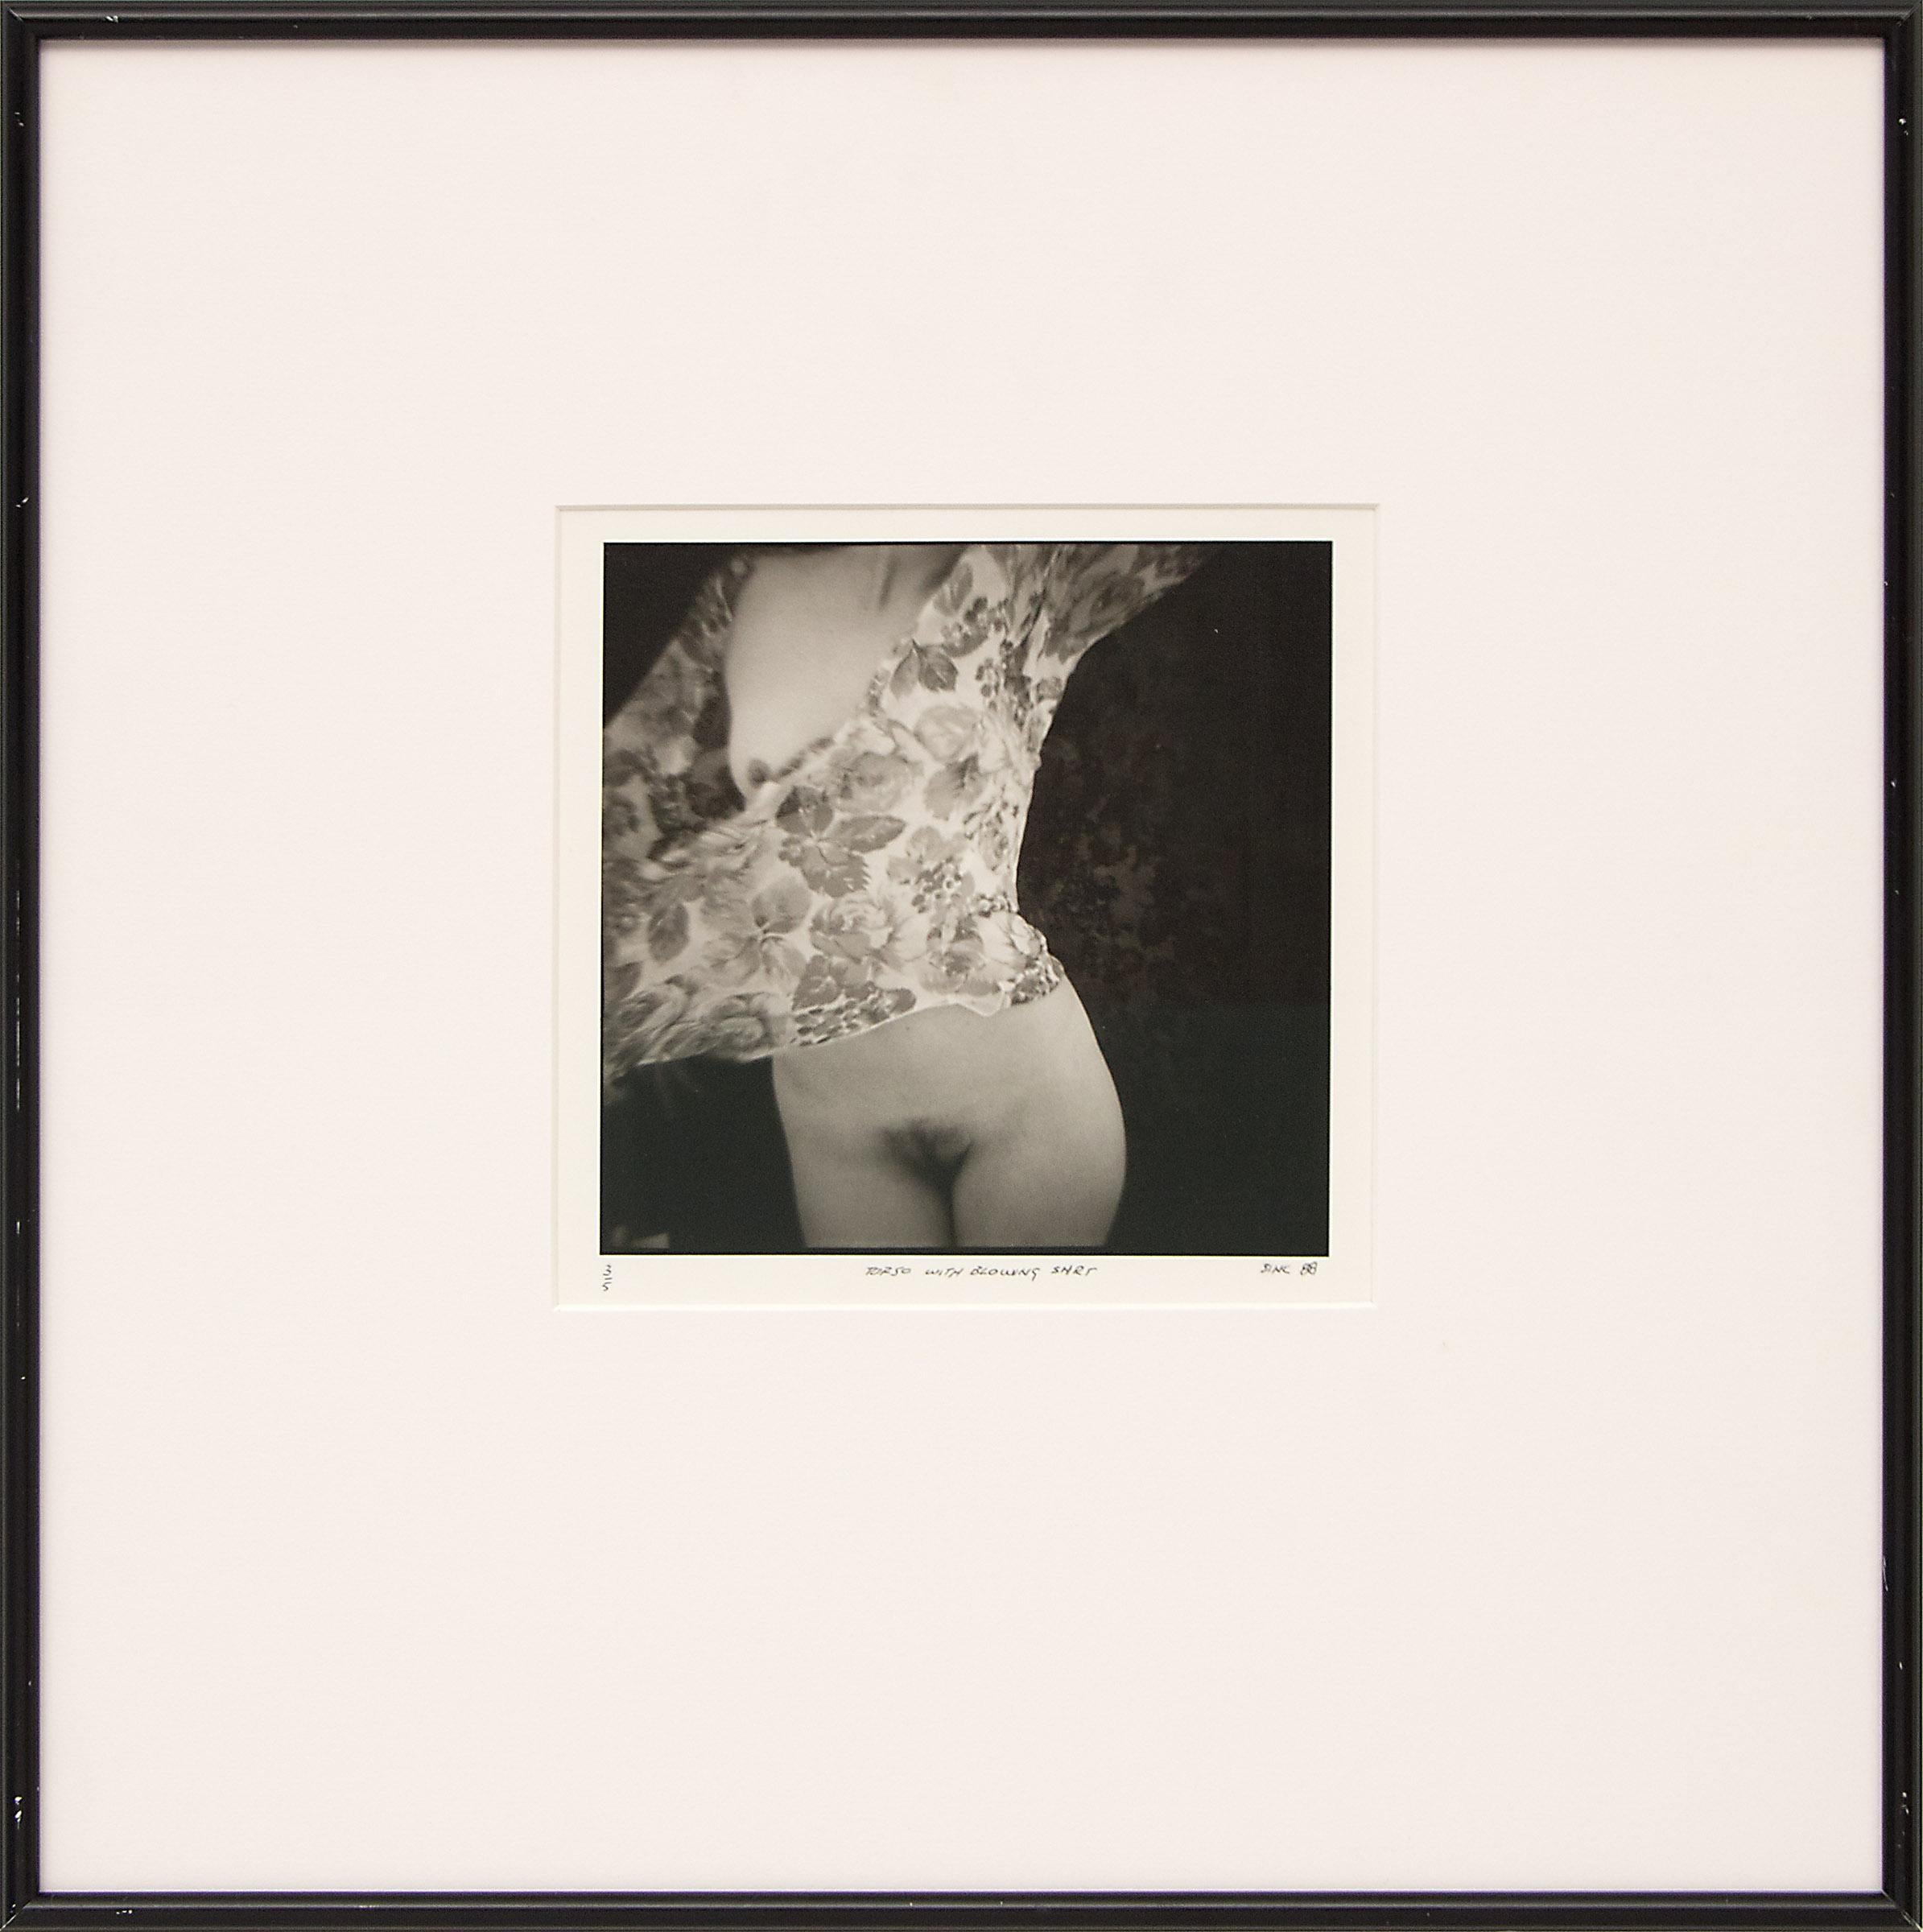 Nude photograph titled 'Torso with Blowing Shirt (3/5)' signed and dated by contemporary artist Mark Sink (b. 1958) taken in 1988. Exhibited as part of "Twelve Nudes and a Gargoyle" at the Willoughby Sharp gallery in NYC 1989. The model's name is